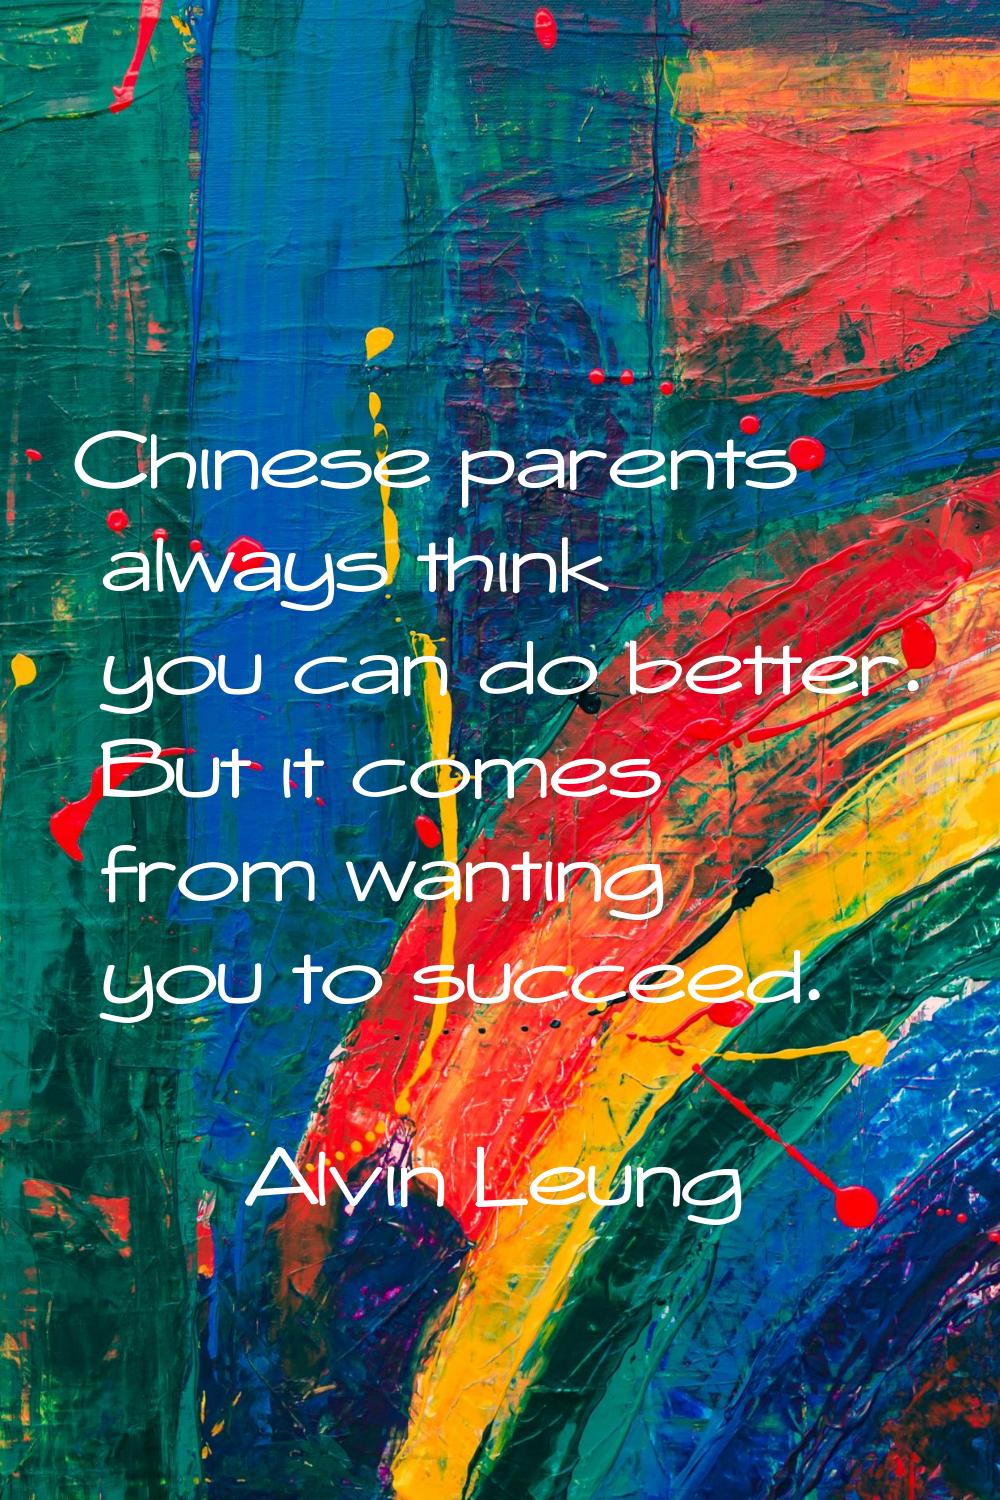 Chinese parents always think you can do better. But it comes from wanting you to succeed.